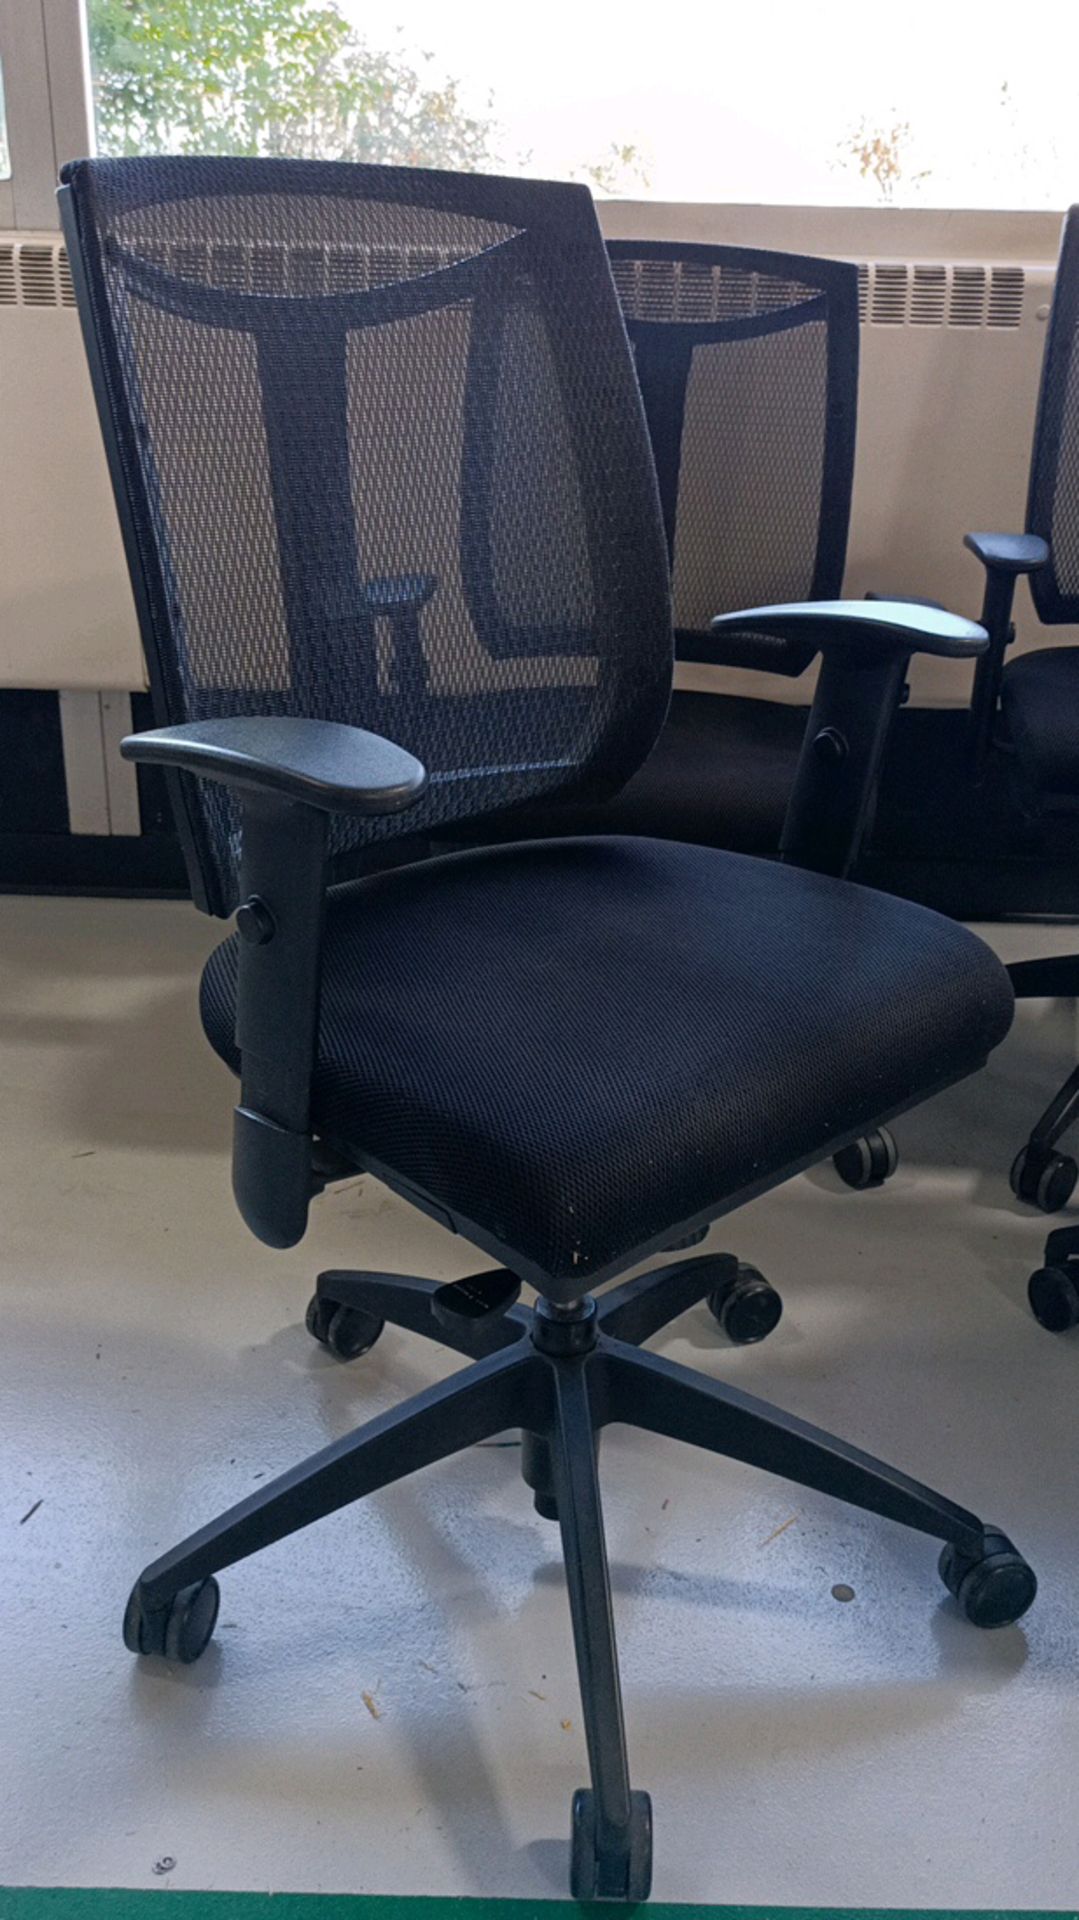 Mesh Mid-Back Office Chairs - Image 2 of 3